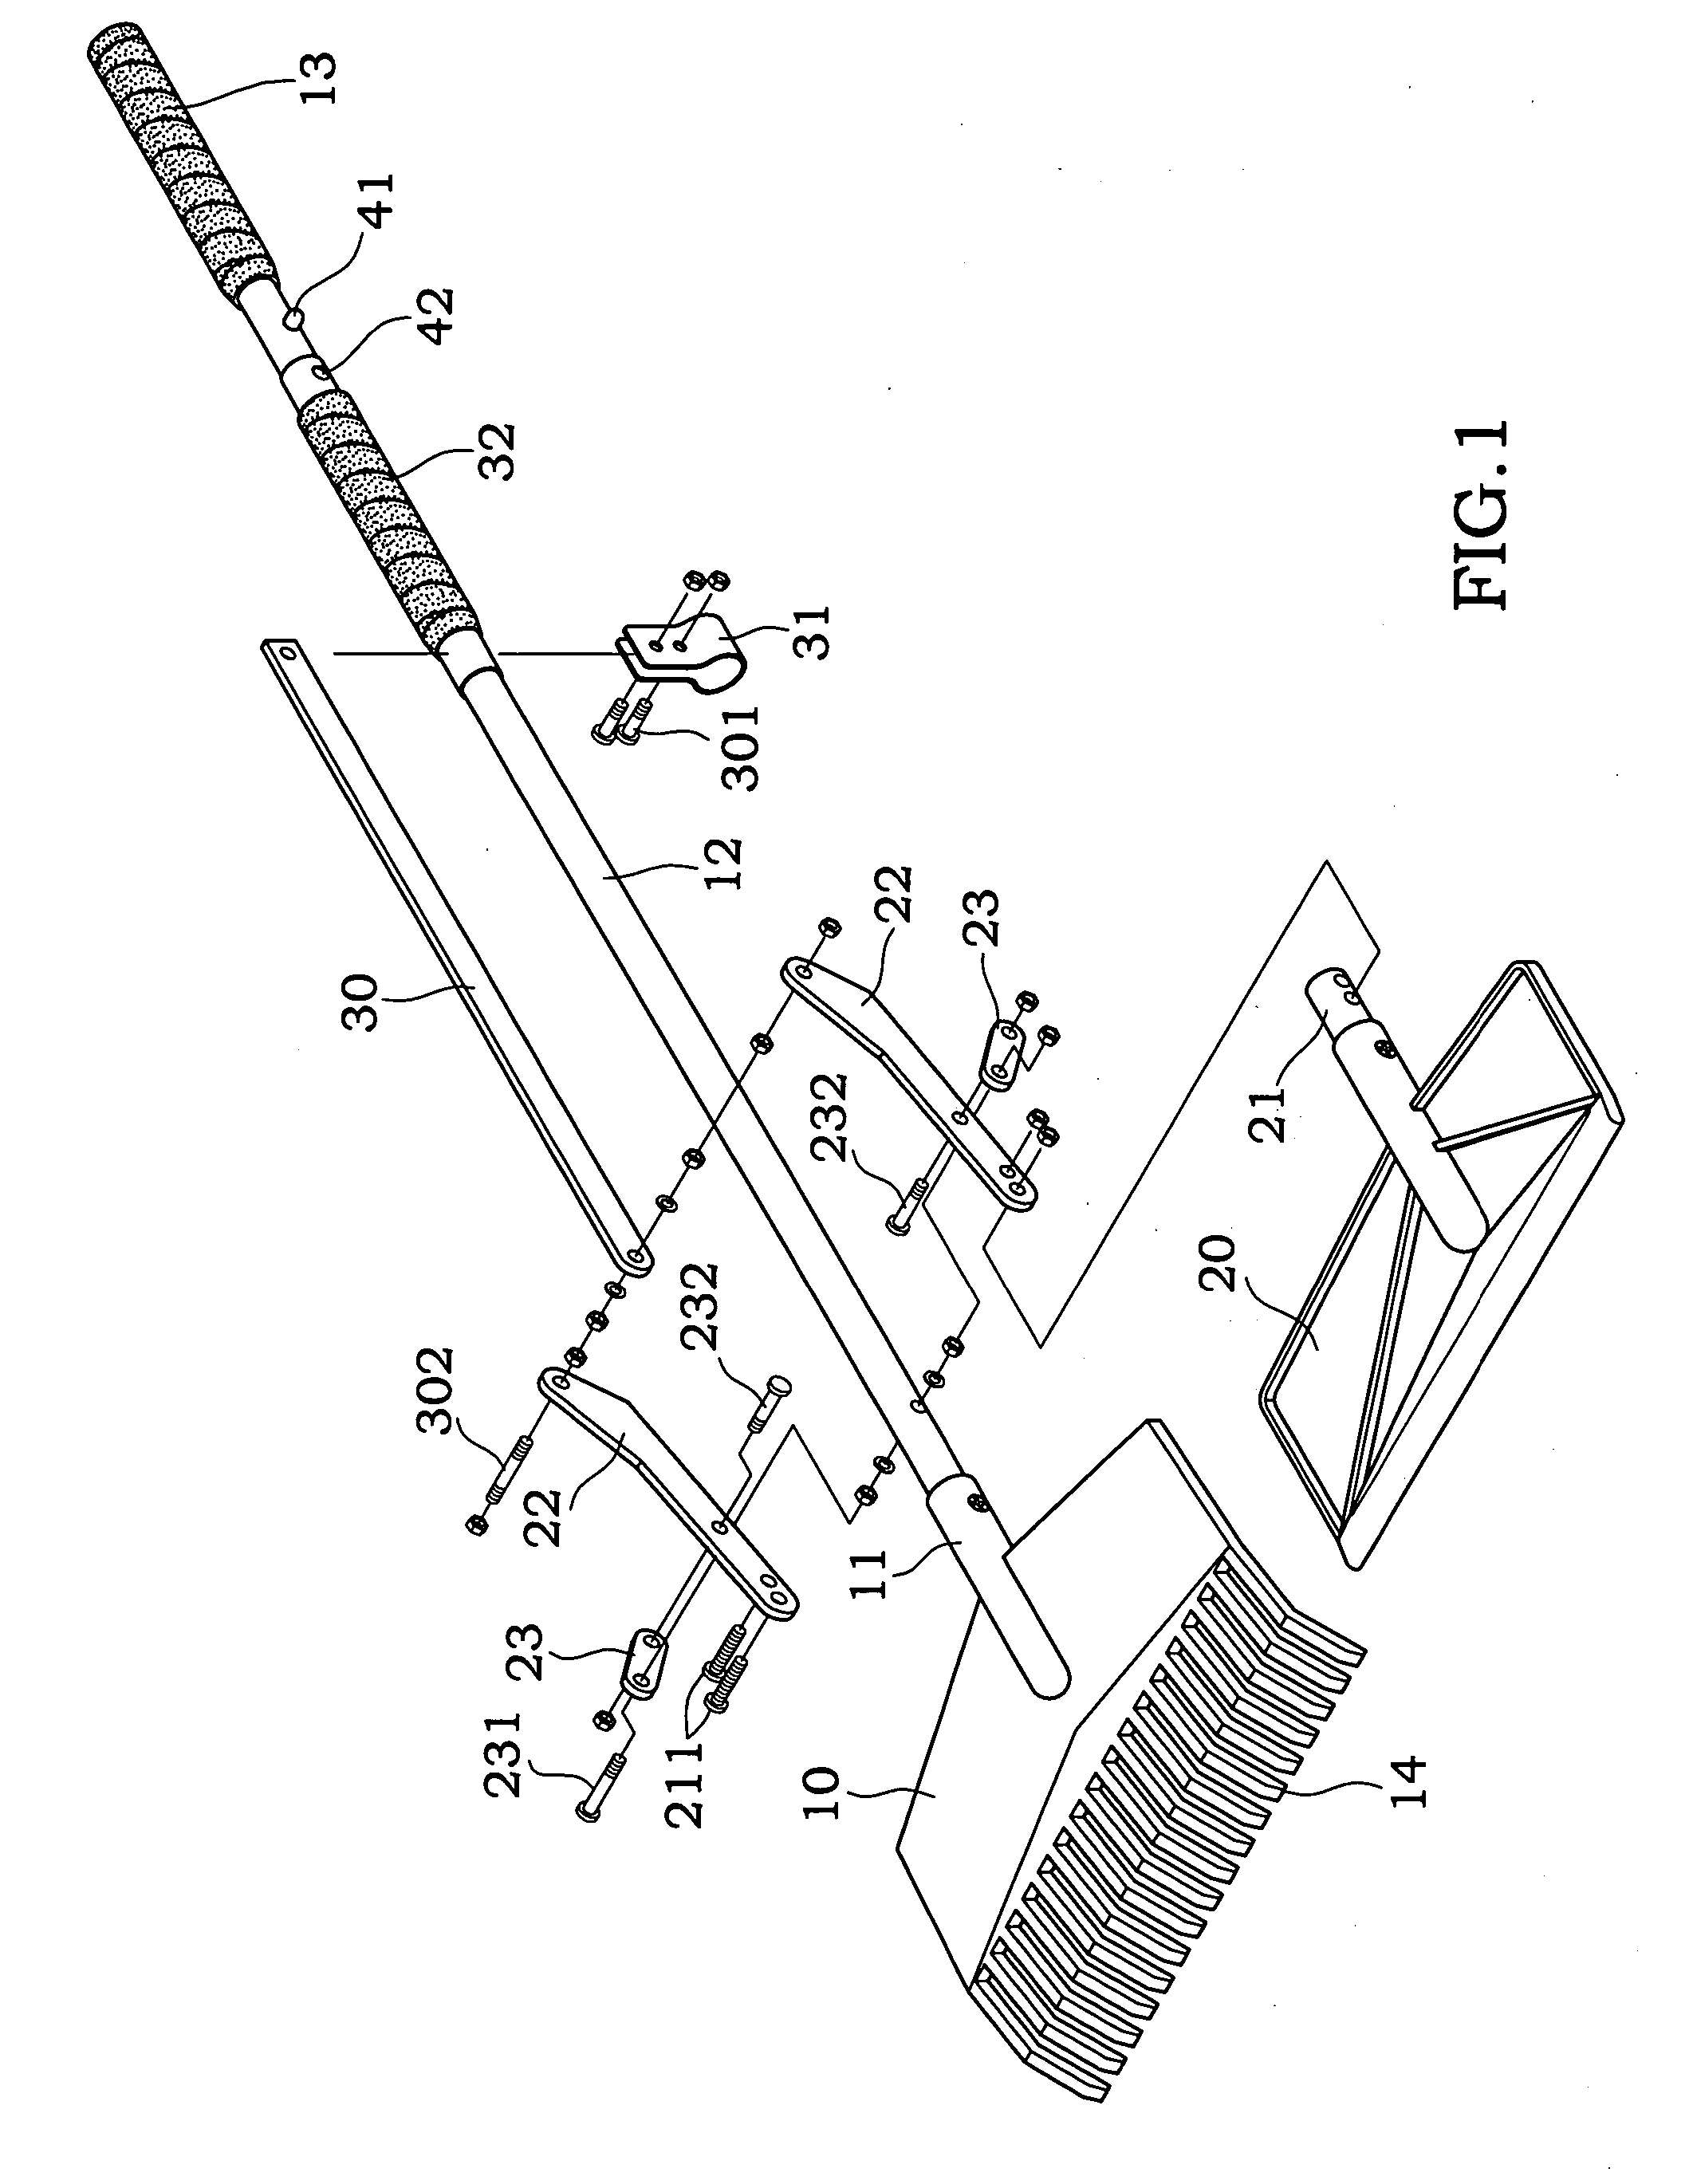 Rake assembly with pickup function